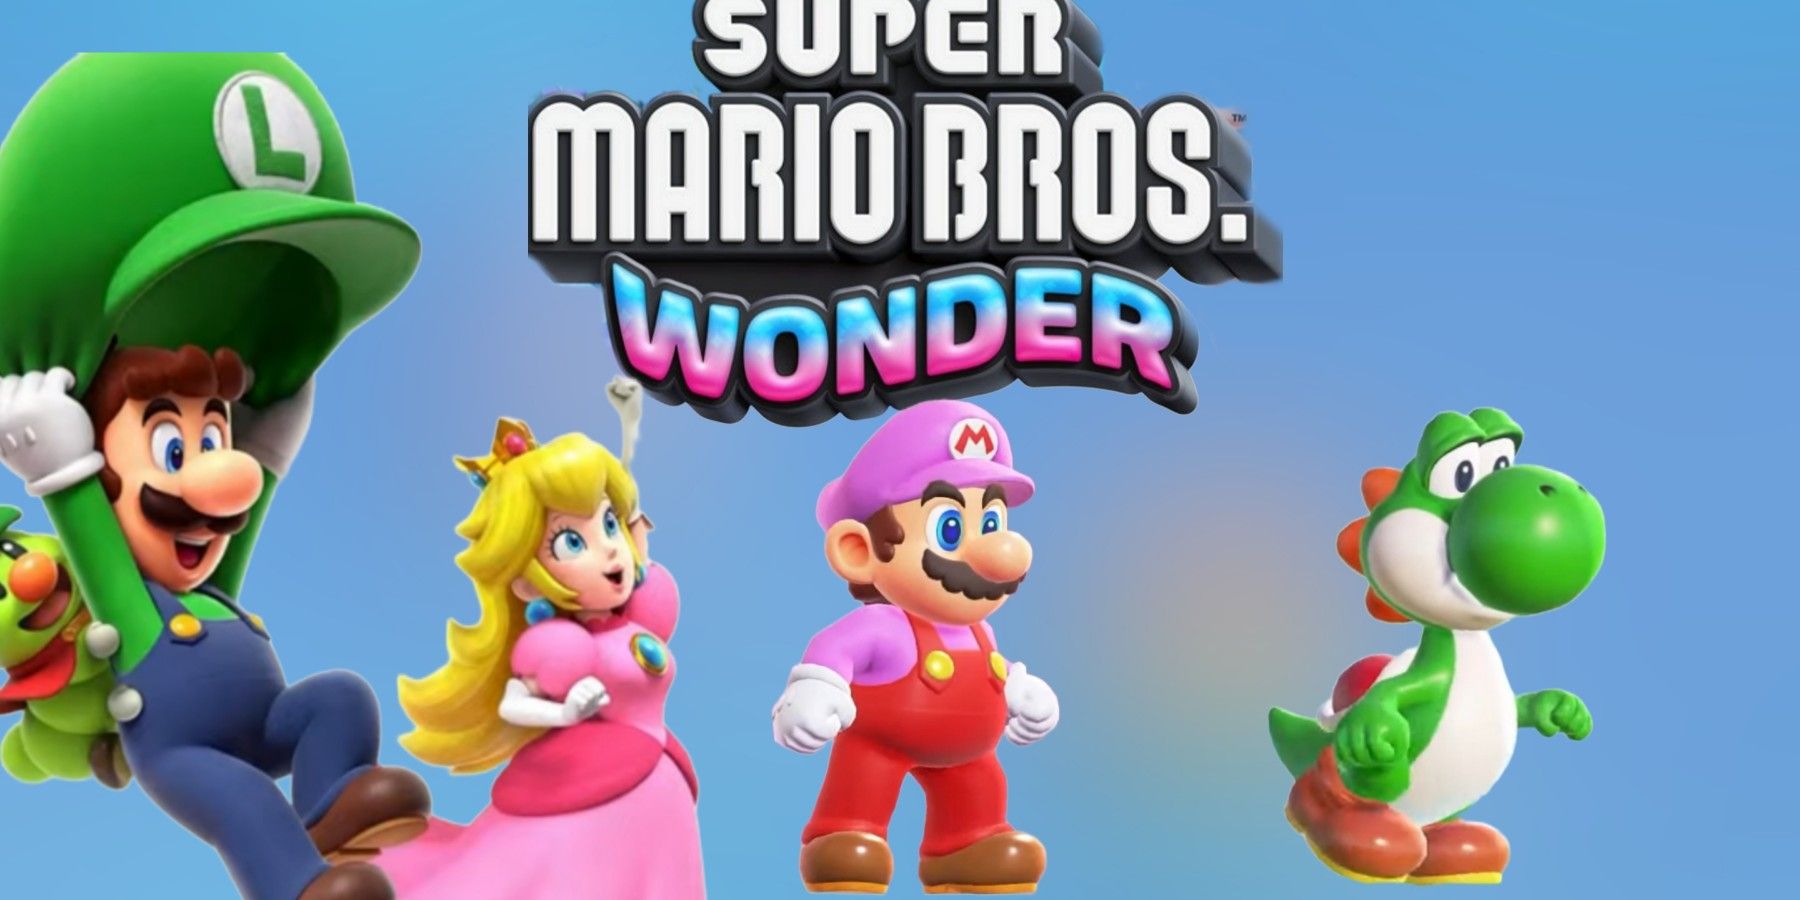 Every Playable Character Confirmed For Super Mario Bros. Wonder